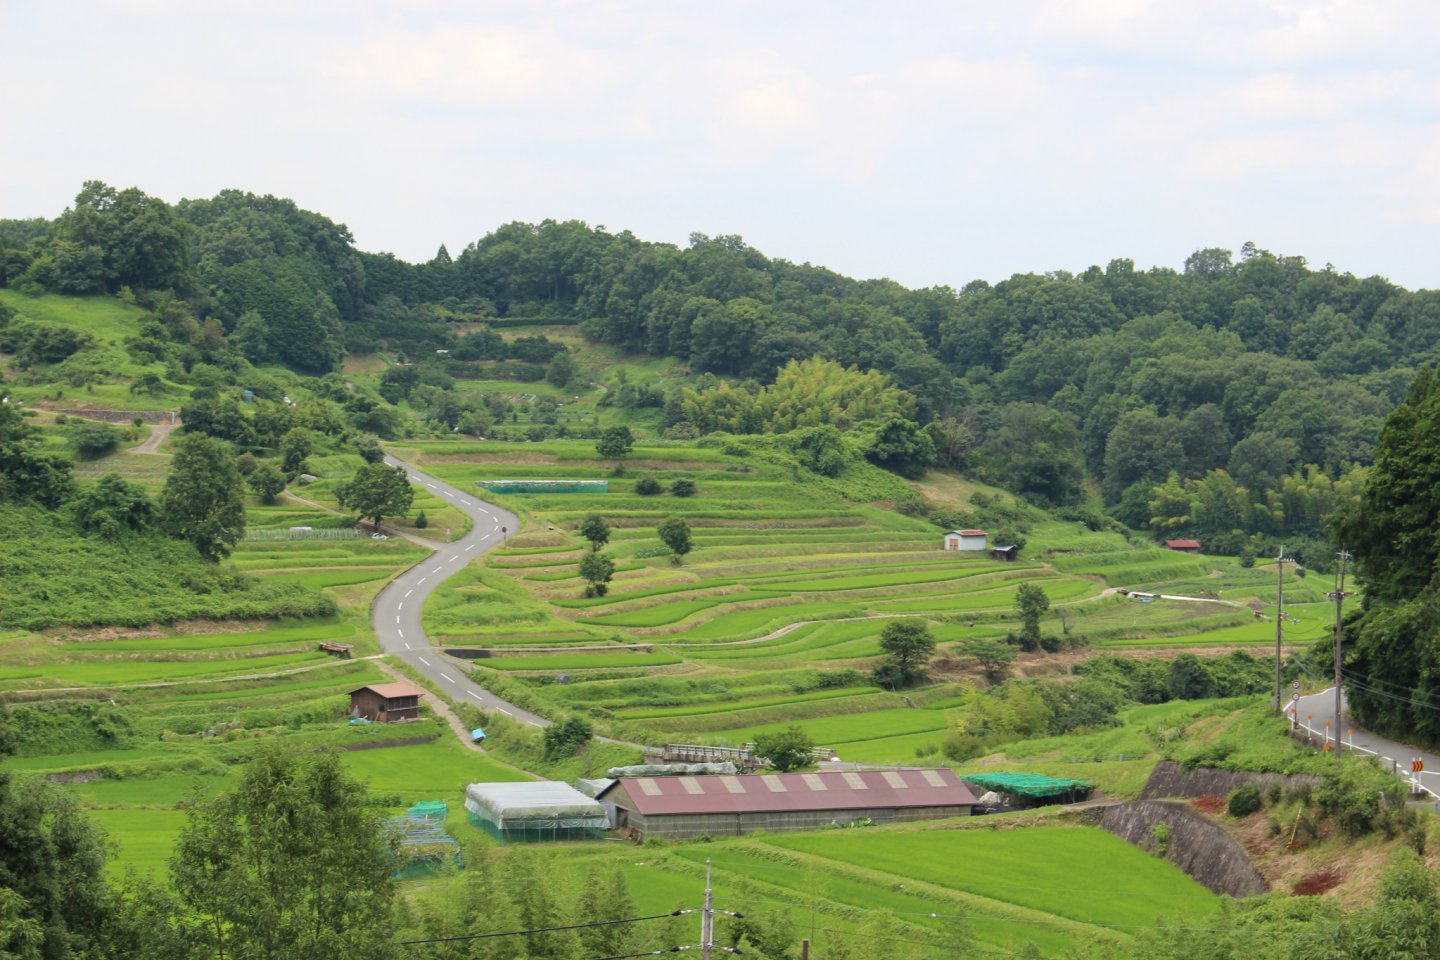 Asuka's Tanada (terraced rice fields) offer countless opportunity to take the perfect post card photo or stroll or ride leisurely through the countryside